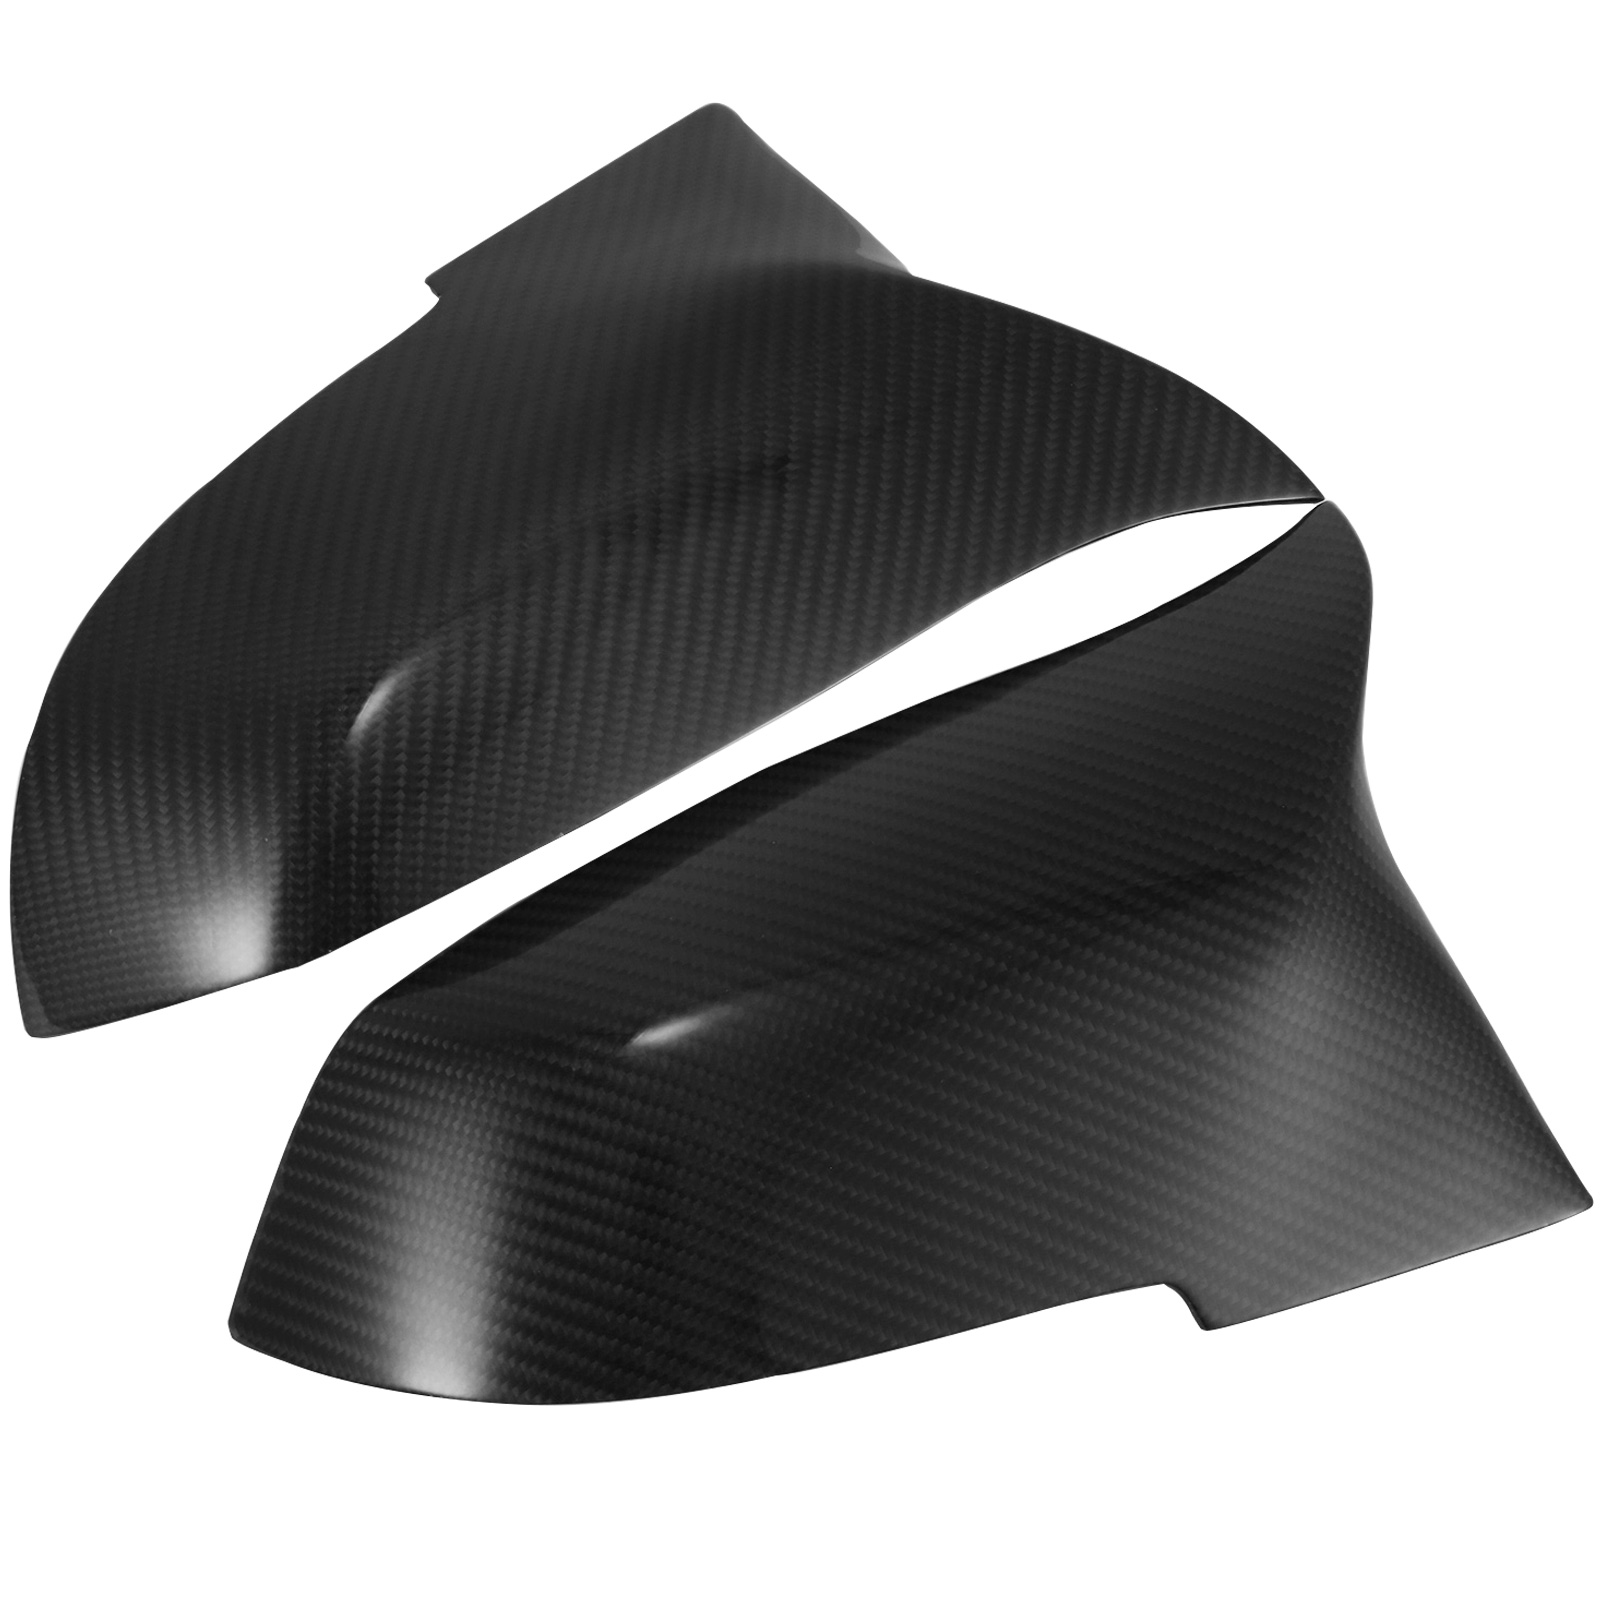 BMW M3/M4 style carbon fibre Replacement Mirror Covers F20 F21 F30 F31 F32 F33 от Vevor Many GEOs